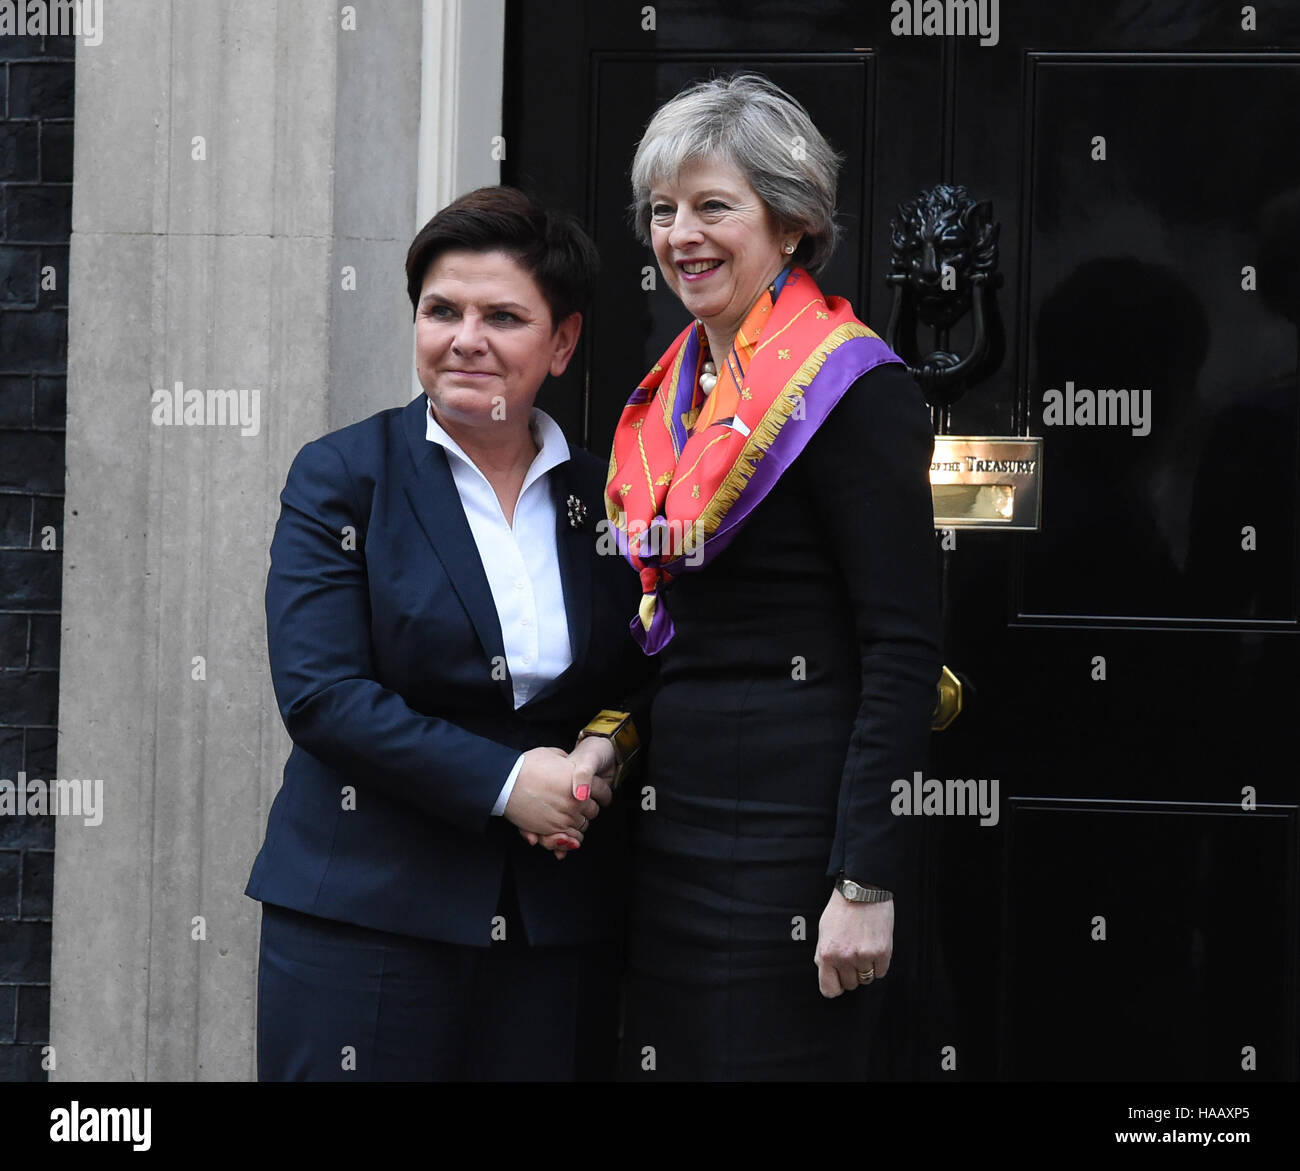 Prime Minister Theresa May welcomes Polish Prime Minister Beata Szydlo to 10 Downing Street, London, ahead of a summit meeting. Stock Photo